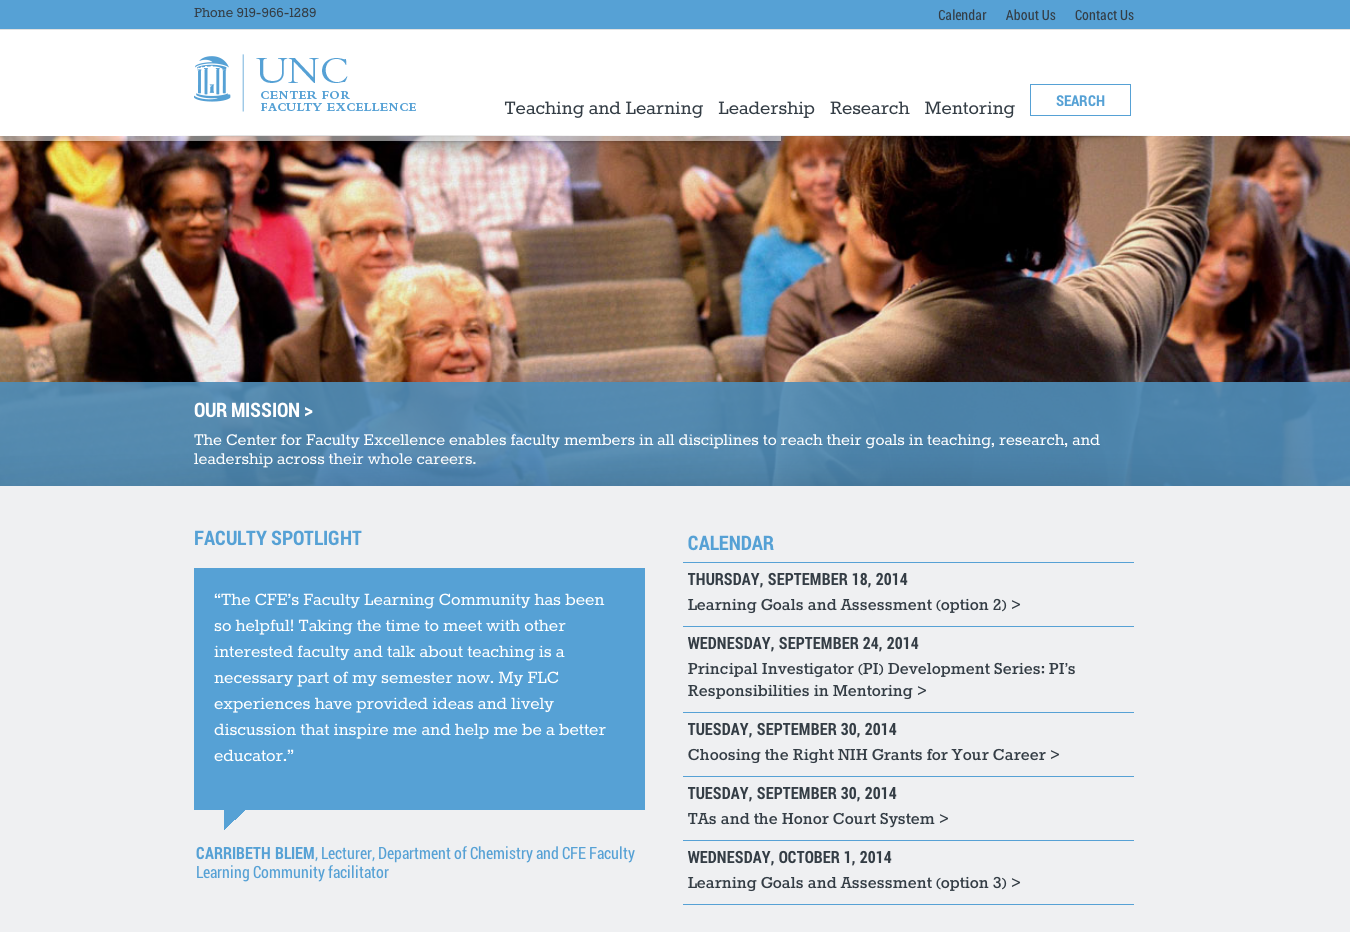 unc center for faculty excellence website